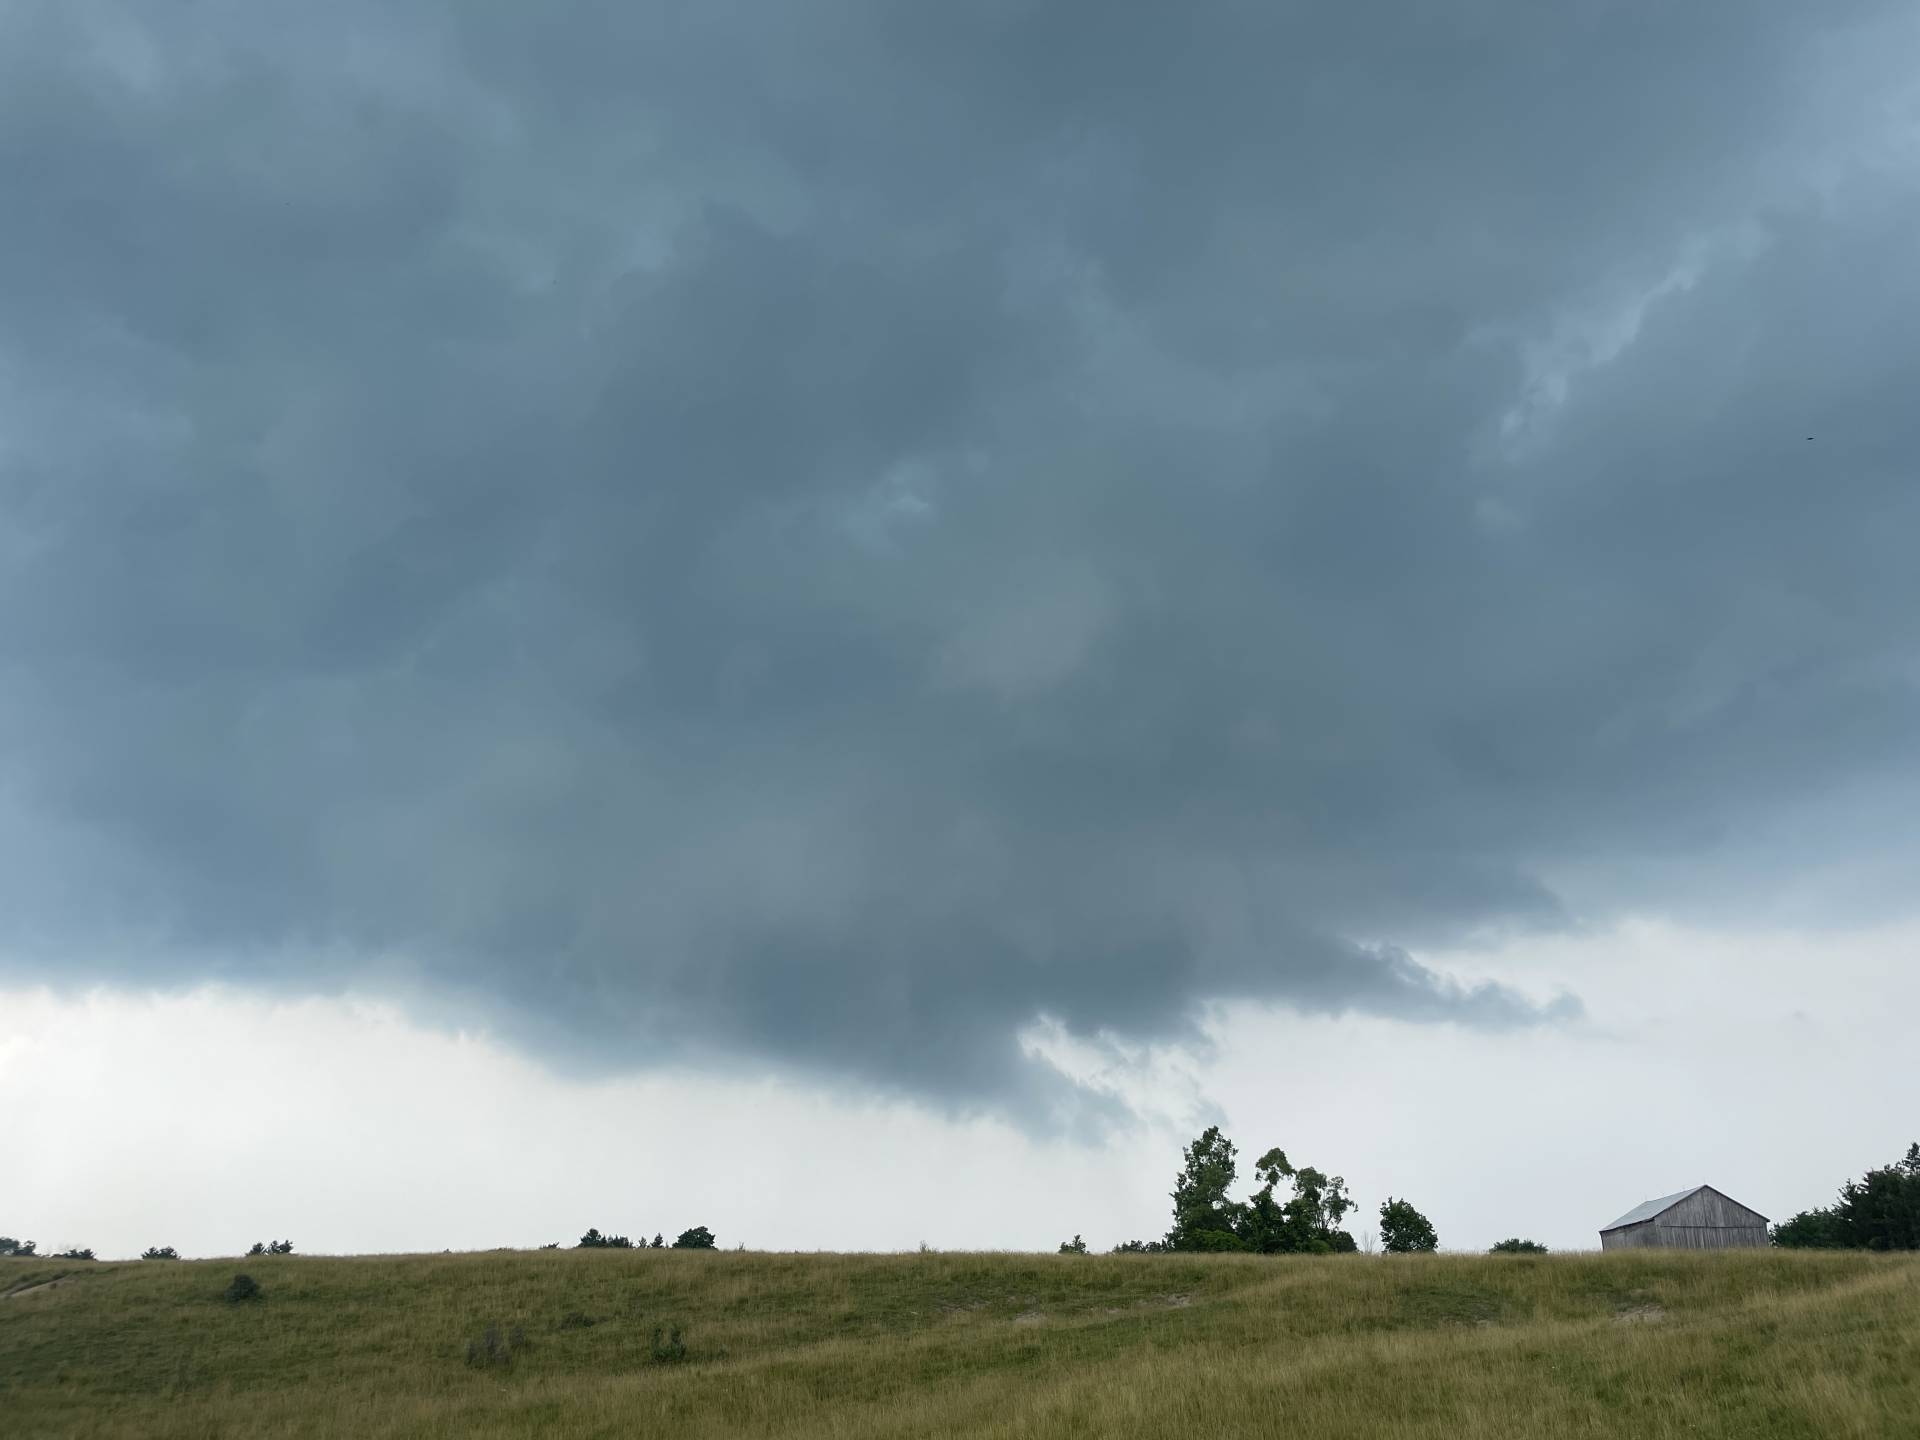 Wall cloud on the Wardsville #onstorm 2:32pm